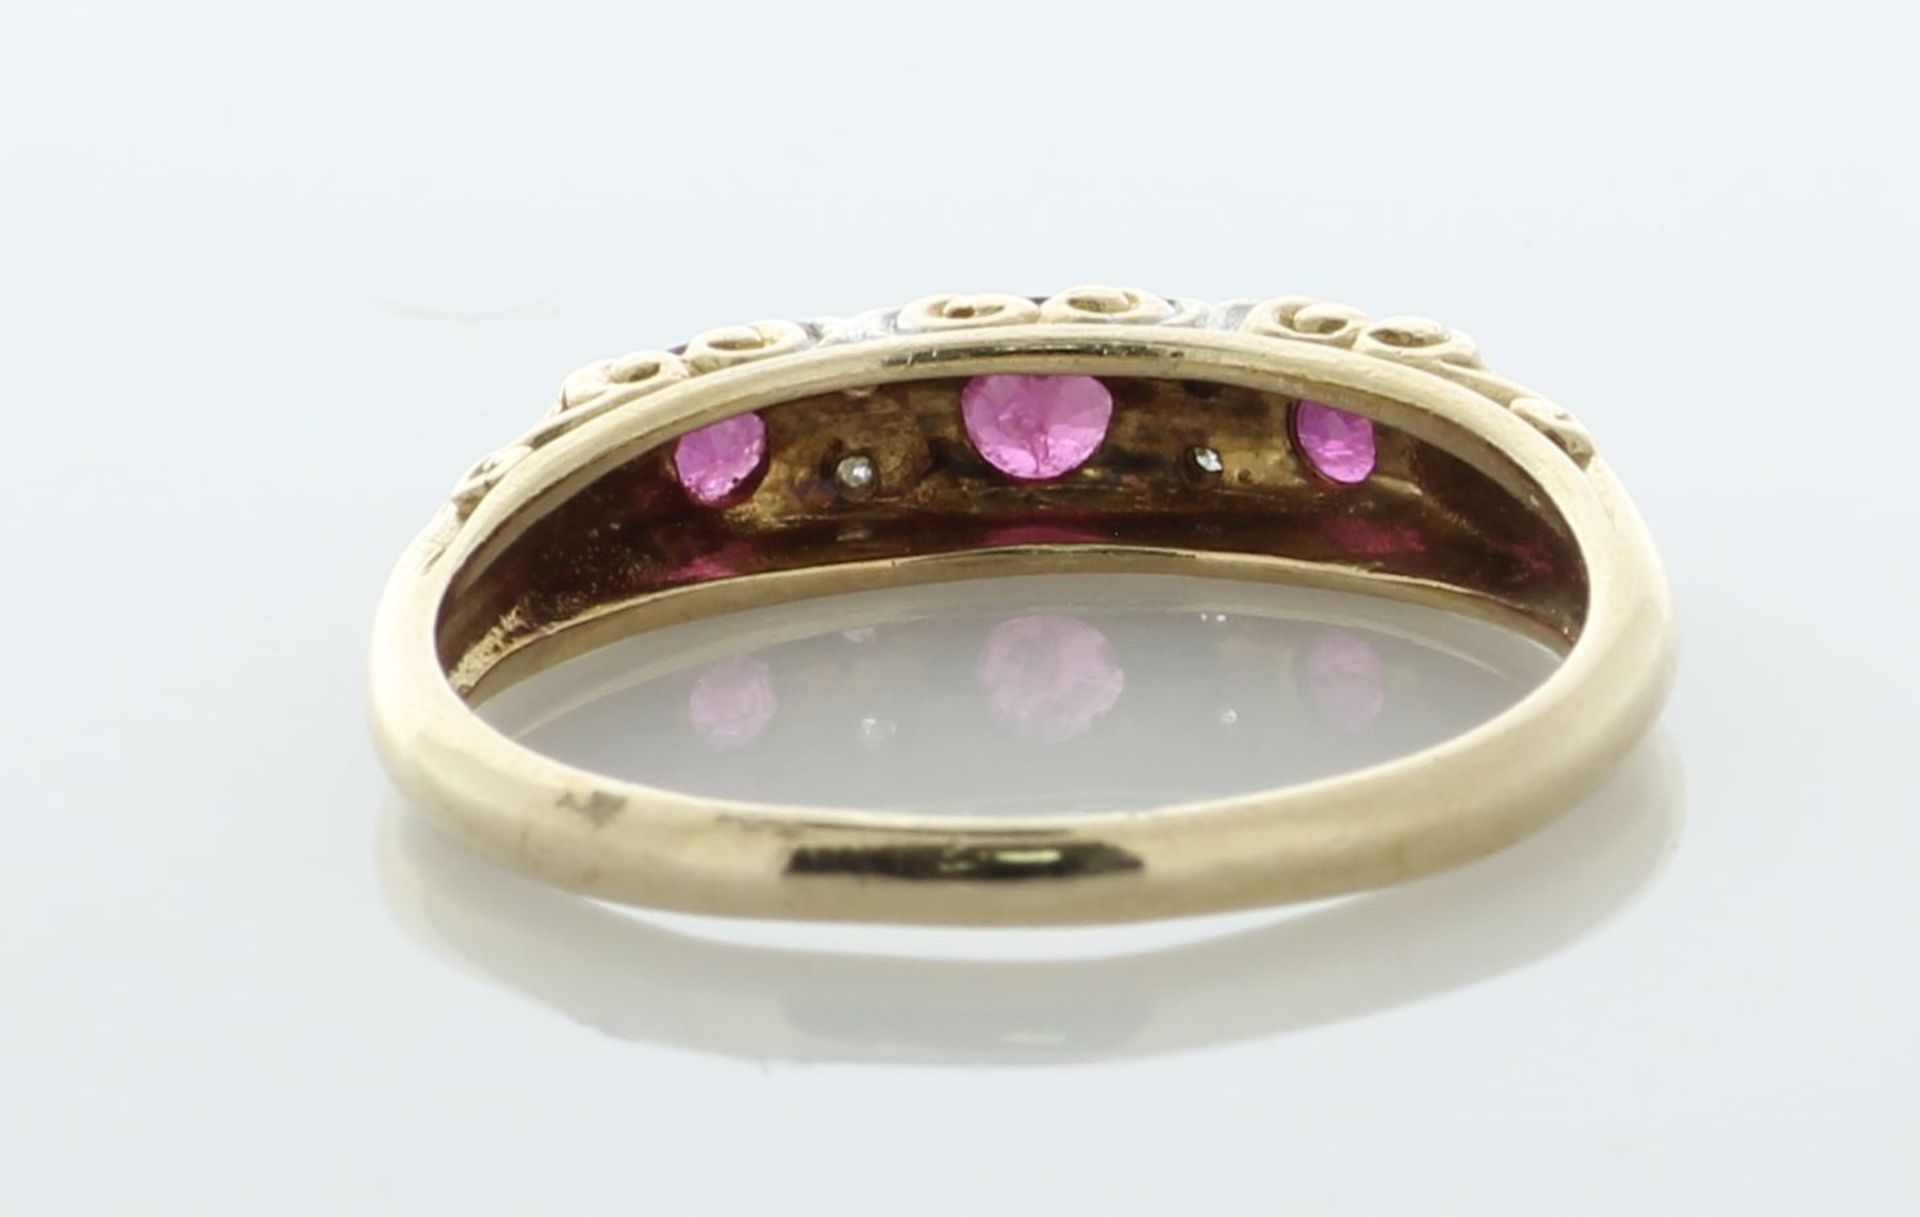 9ct Yellow Gold And White Gold Diamond And Ruby Ring (R 0.30) 0.05 Carats - Valued By AGI £815. - Image 4 of 6